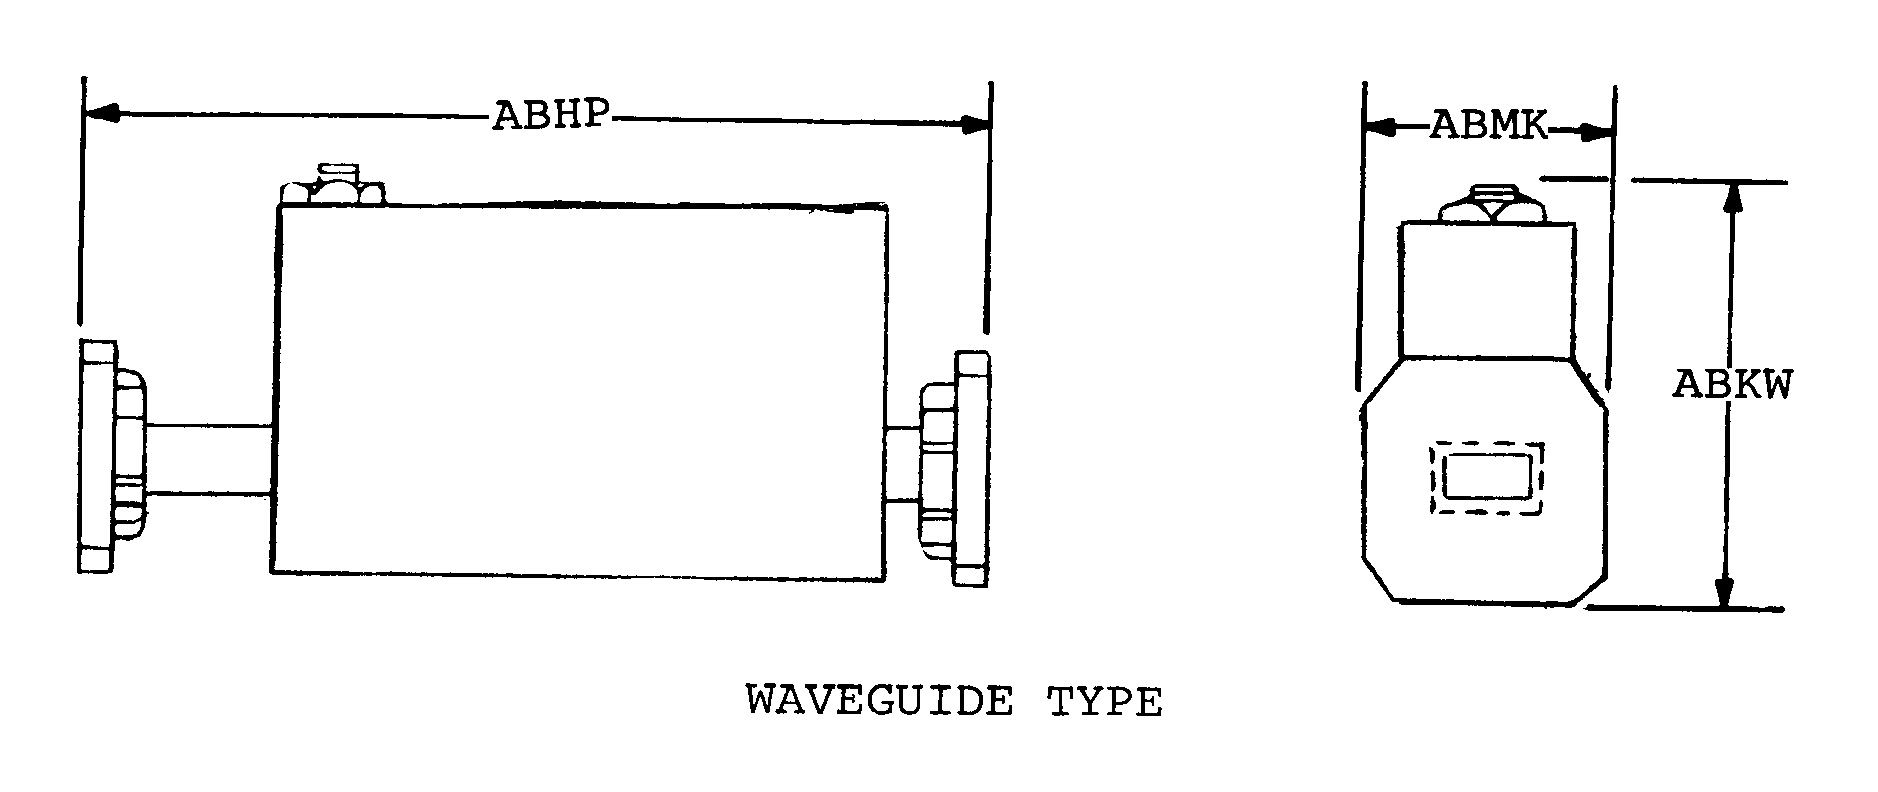 WAVEGUIDE TYPE style nsn 5985-01-068-4663